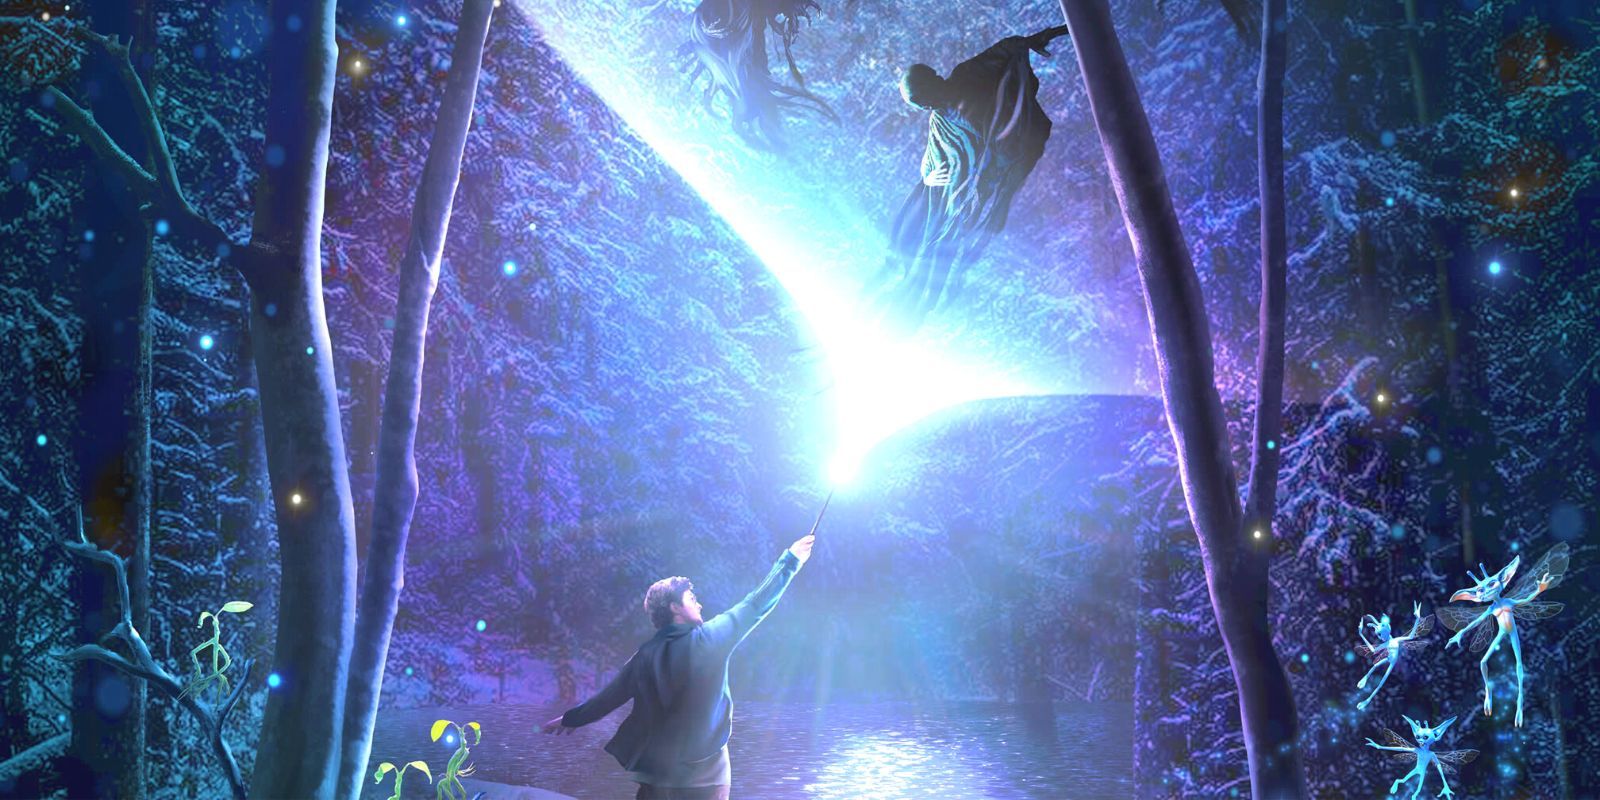 Harry Potter blasting expecto patronum at a dementor in the Forbidden Forest